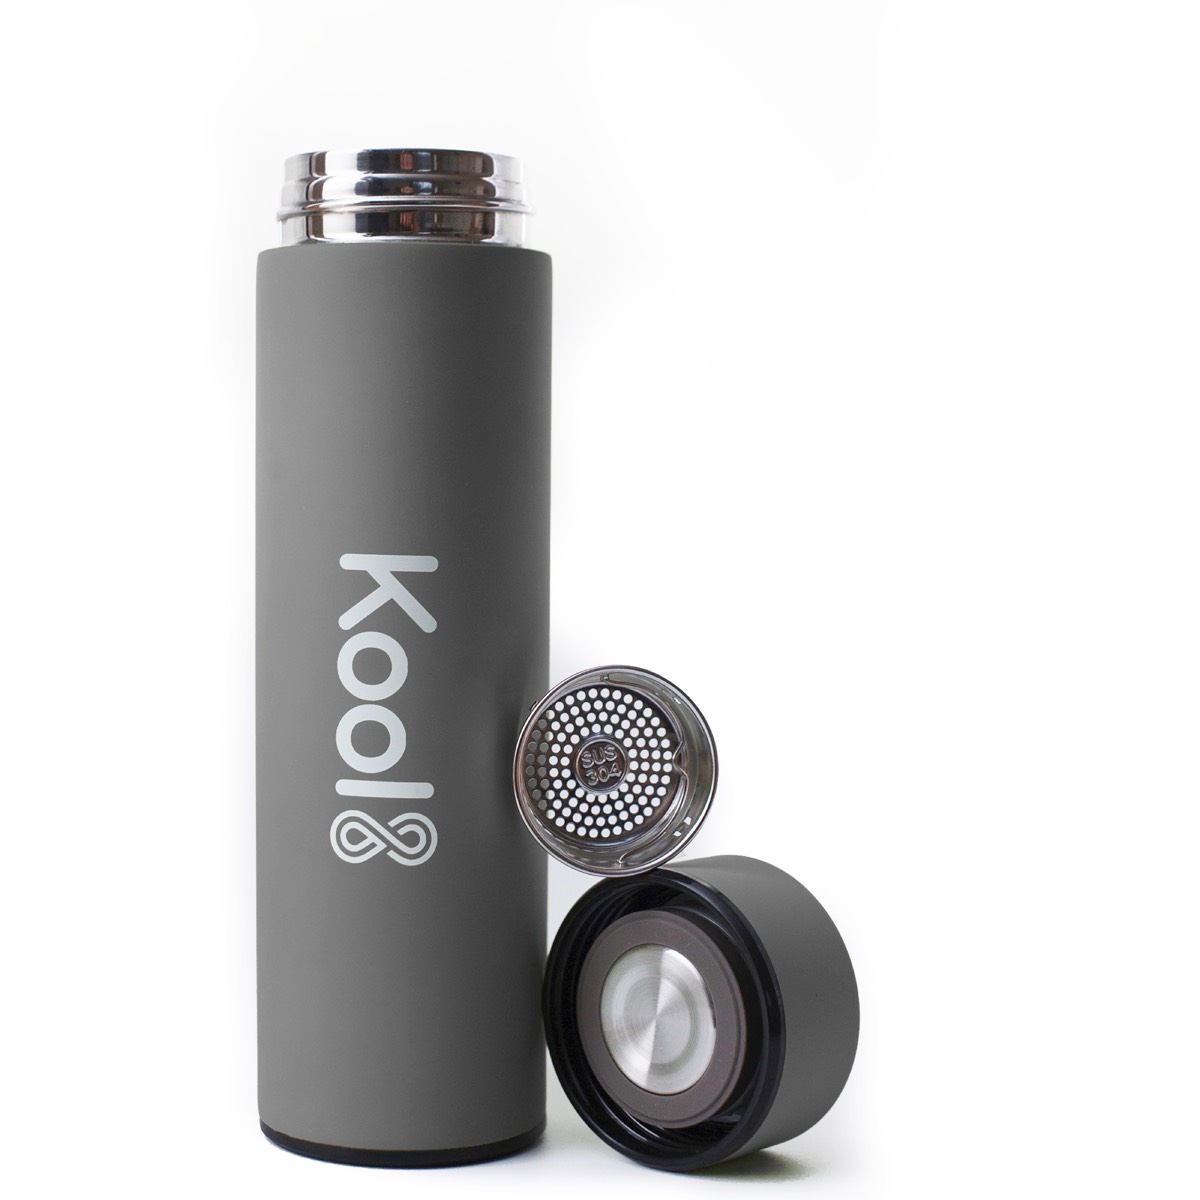 19 Reasons Why Everyone Should Own A Stainless Steel Water Bottle - Kool8